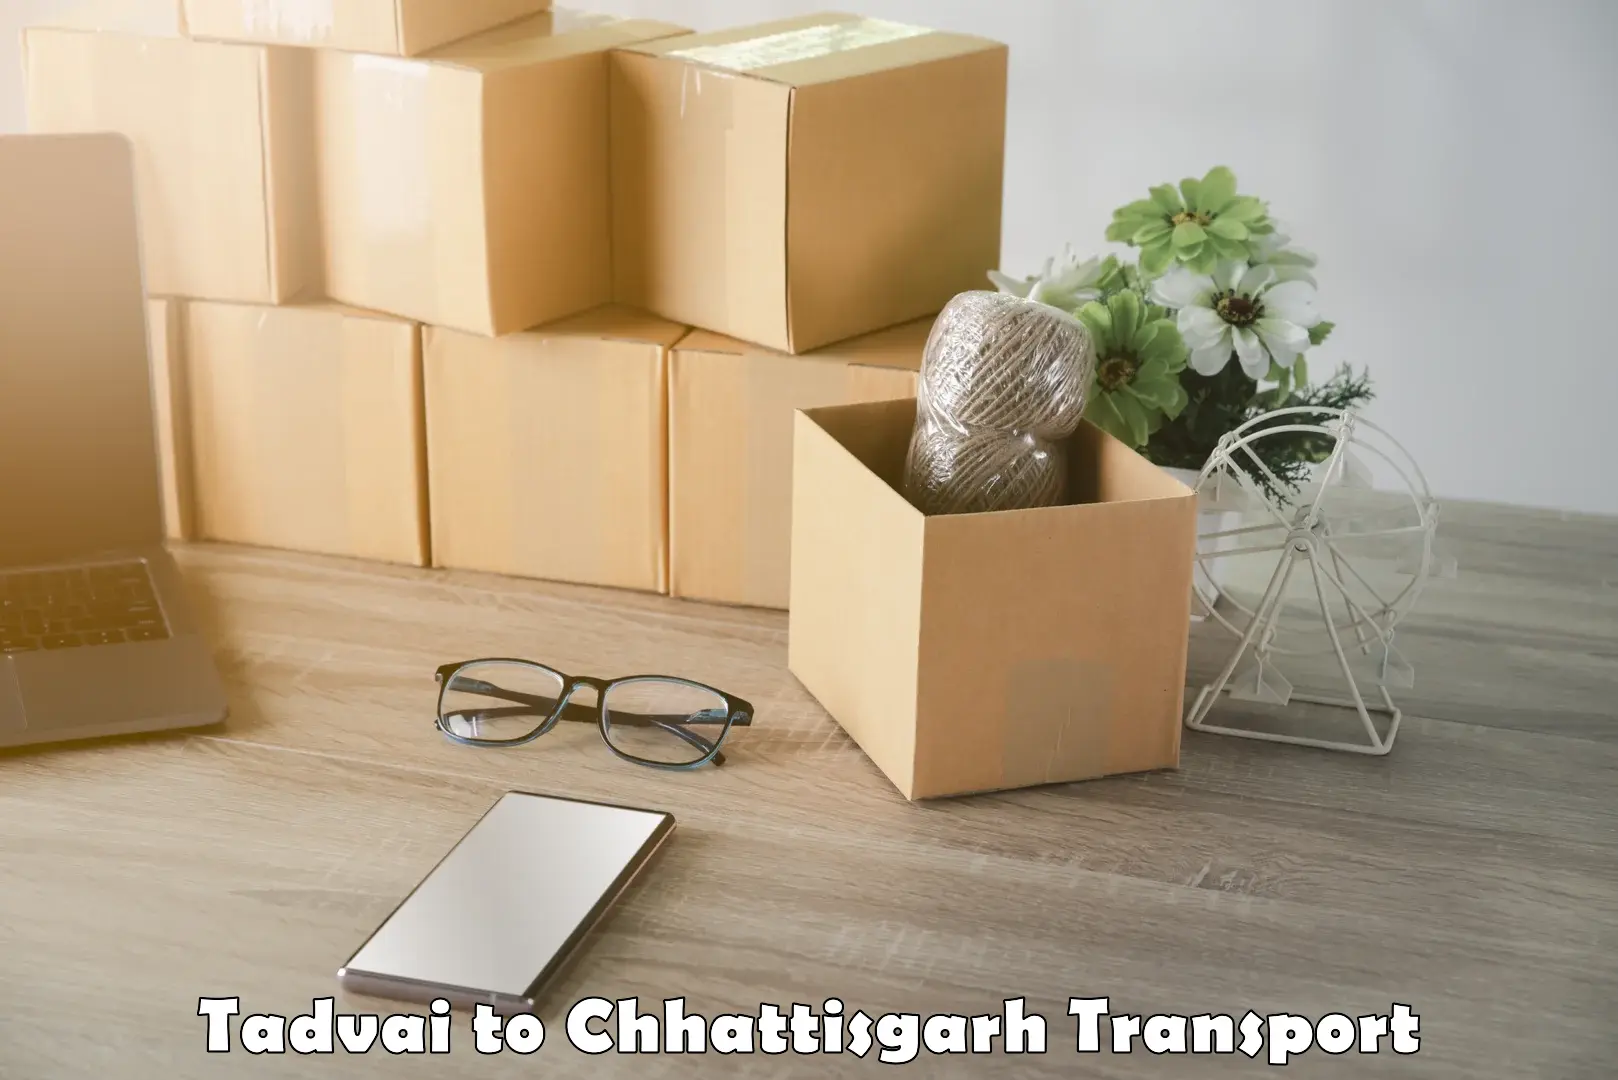 Transport in sharing Tadvai to Kharsia